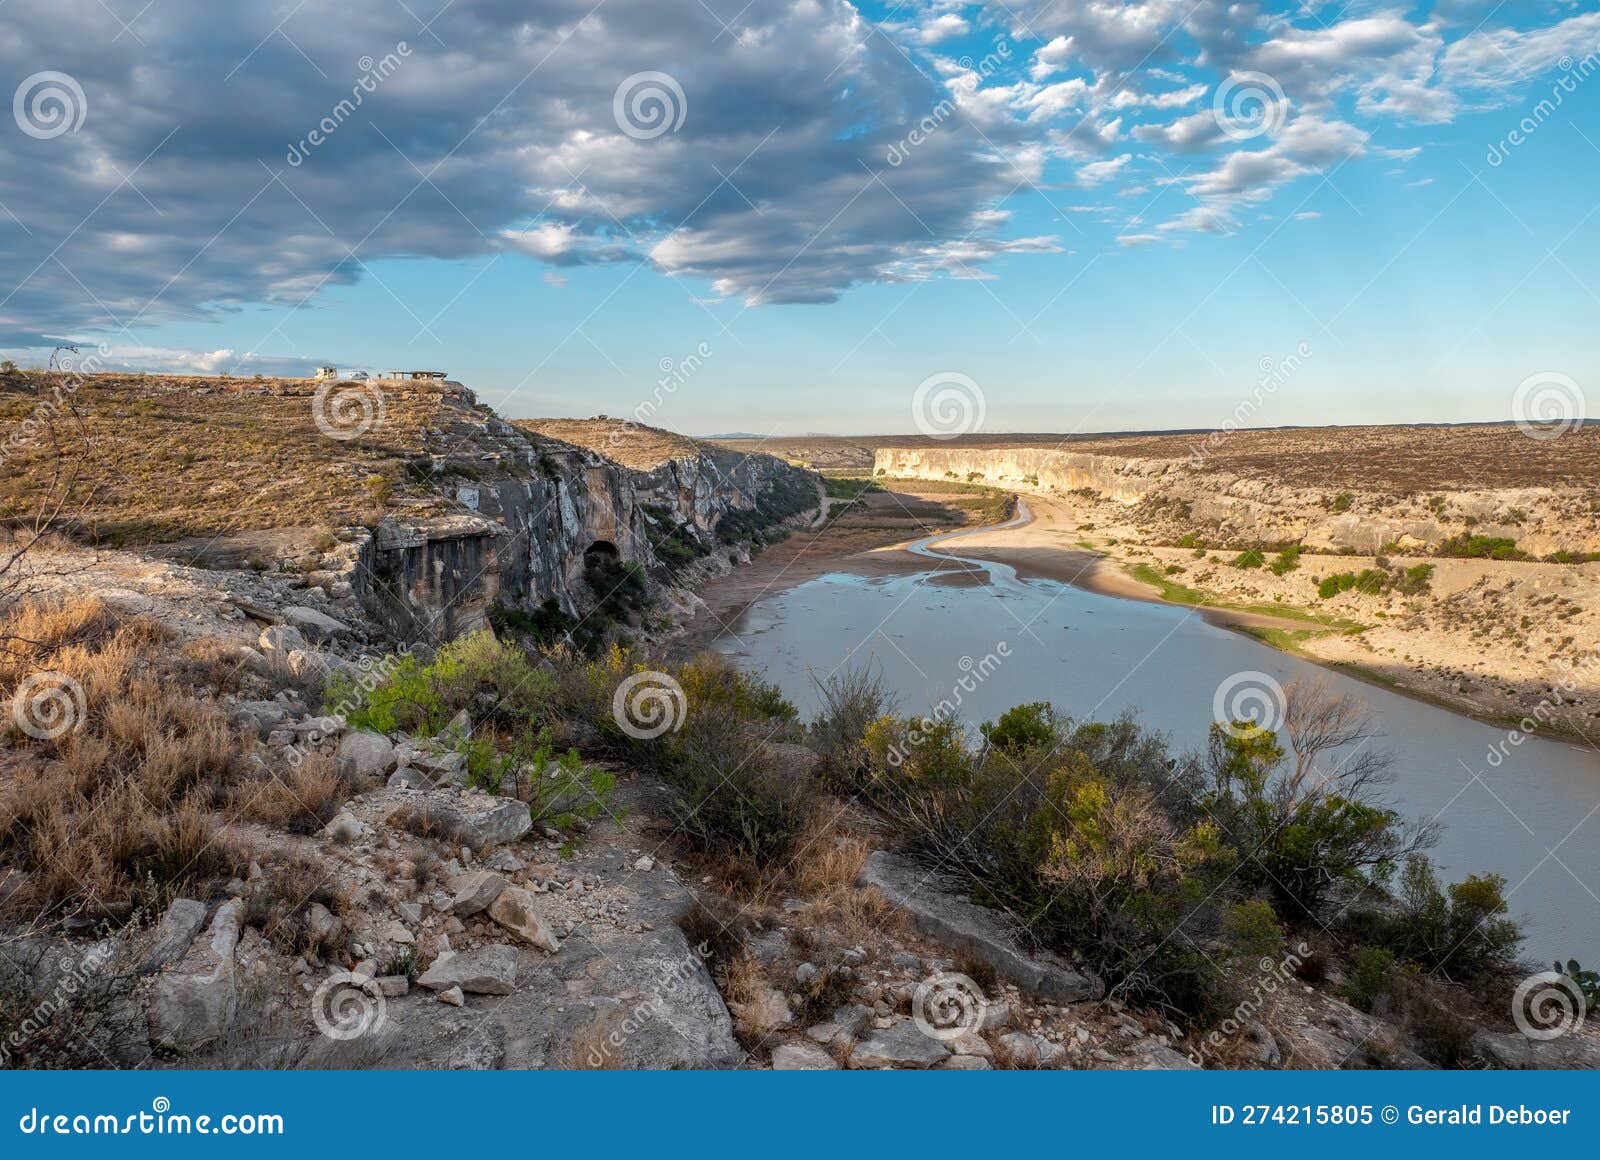 https://thumbs.dreamstime.com/z/pecos-river-valley-texas-overlook-short-distance-emptying-rio-grand-forms-border-274215805.jpg